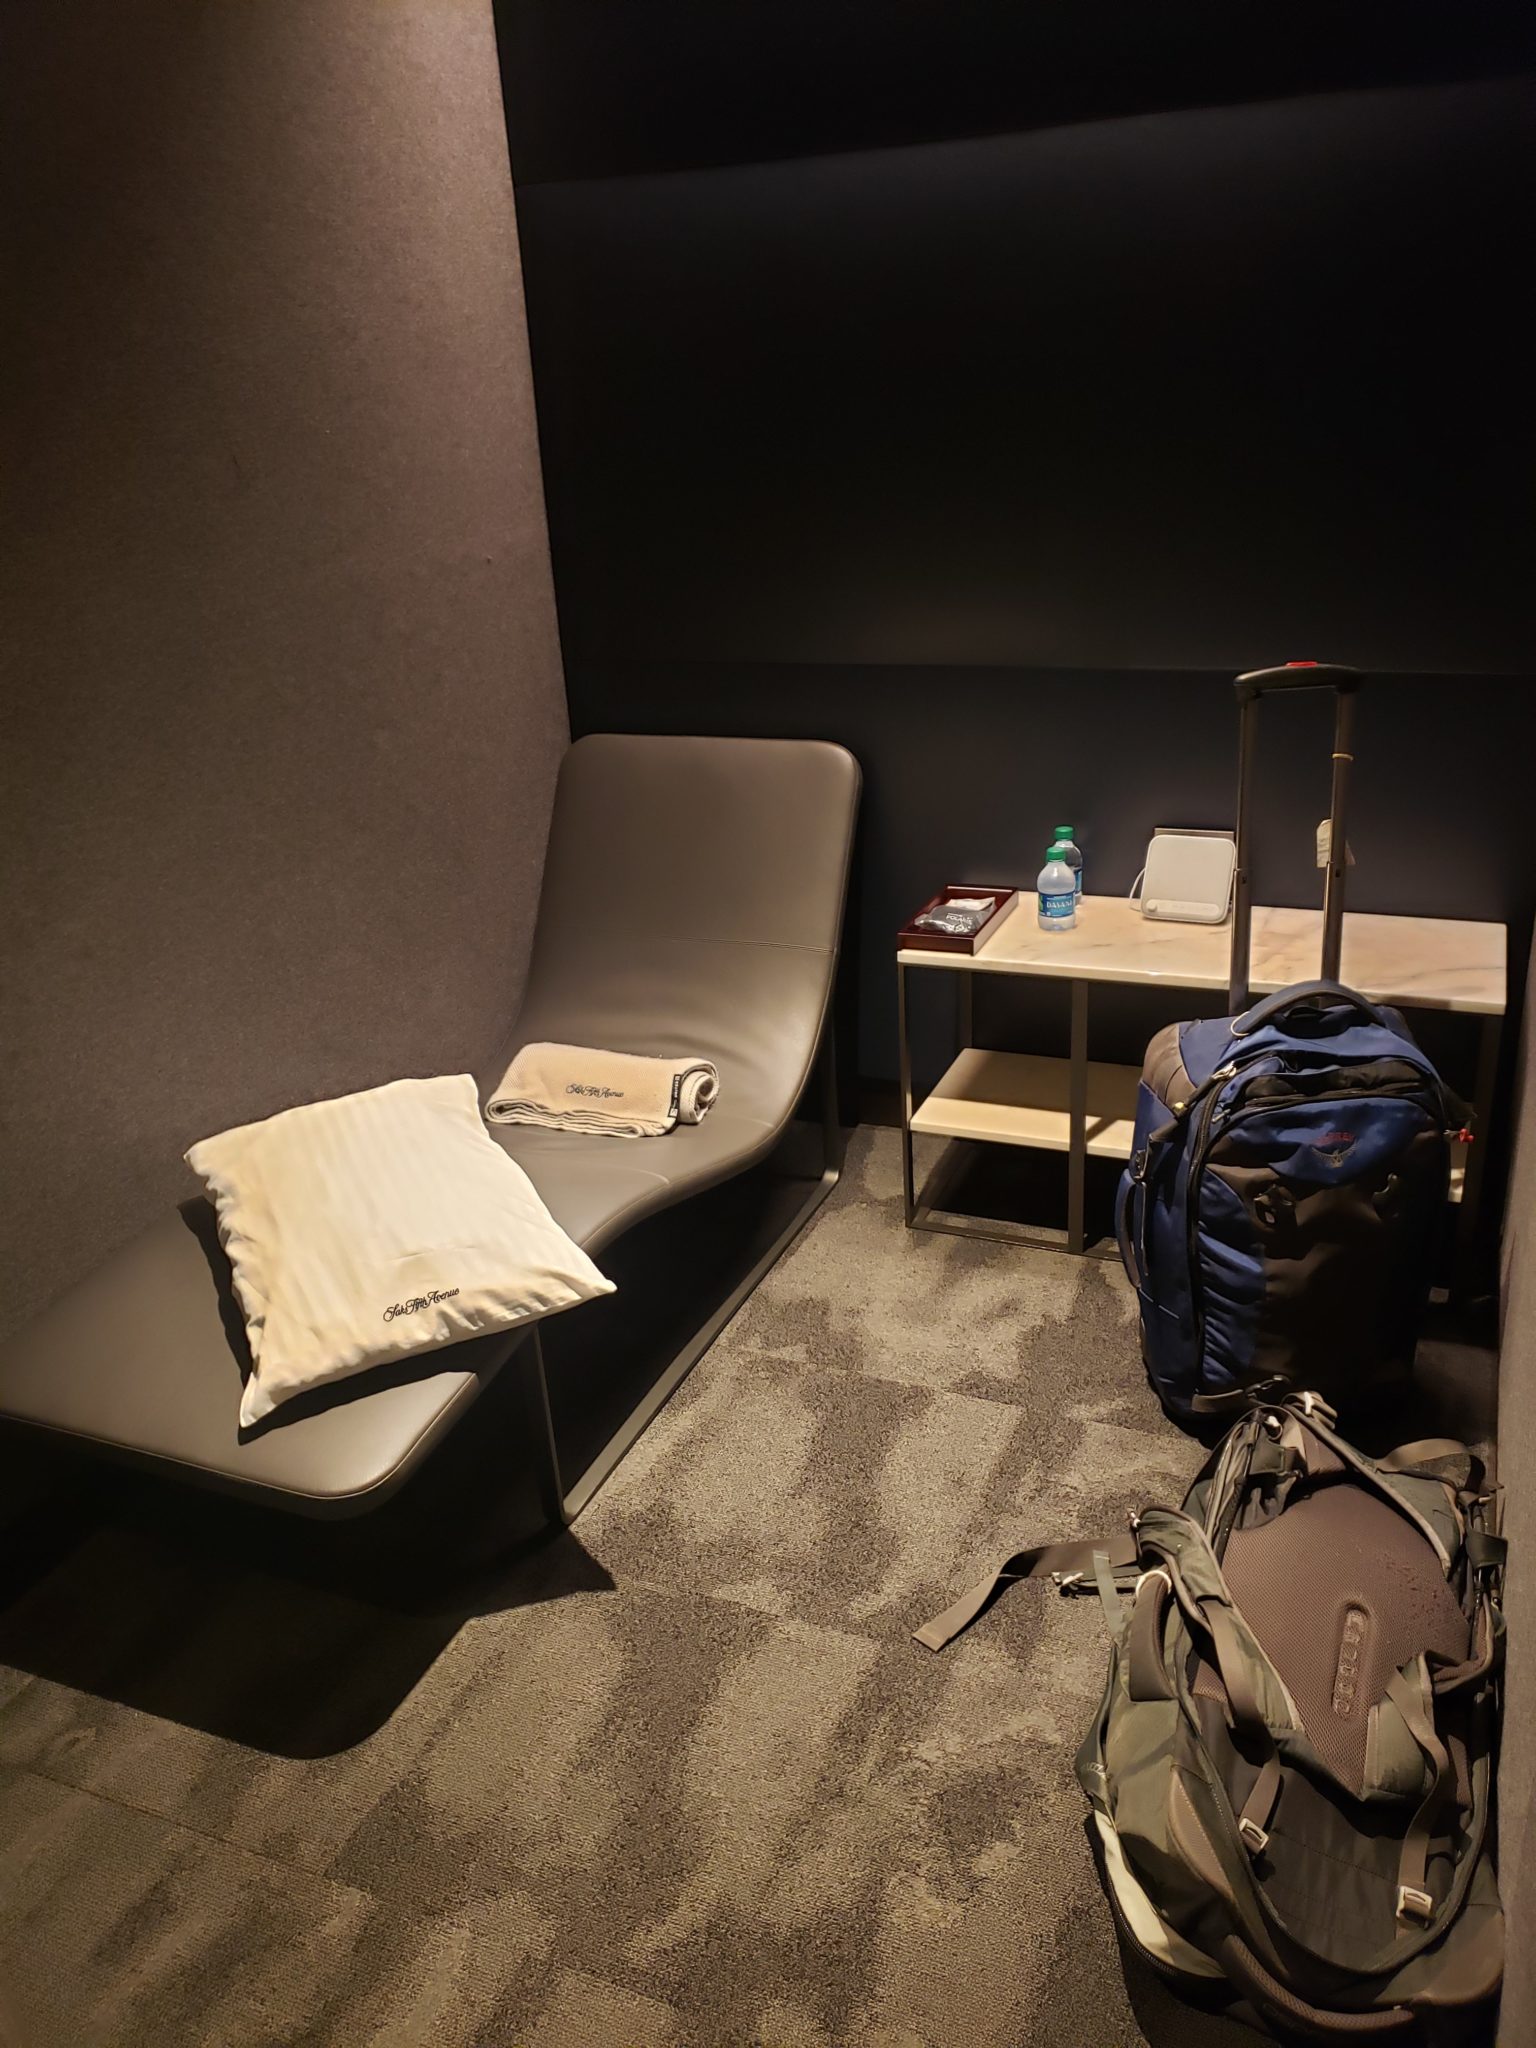 a chair and luggage in a room